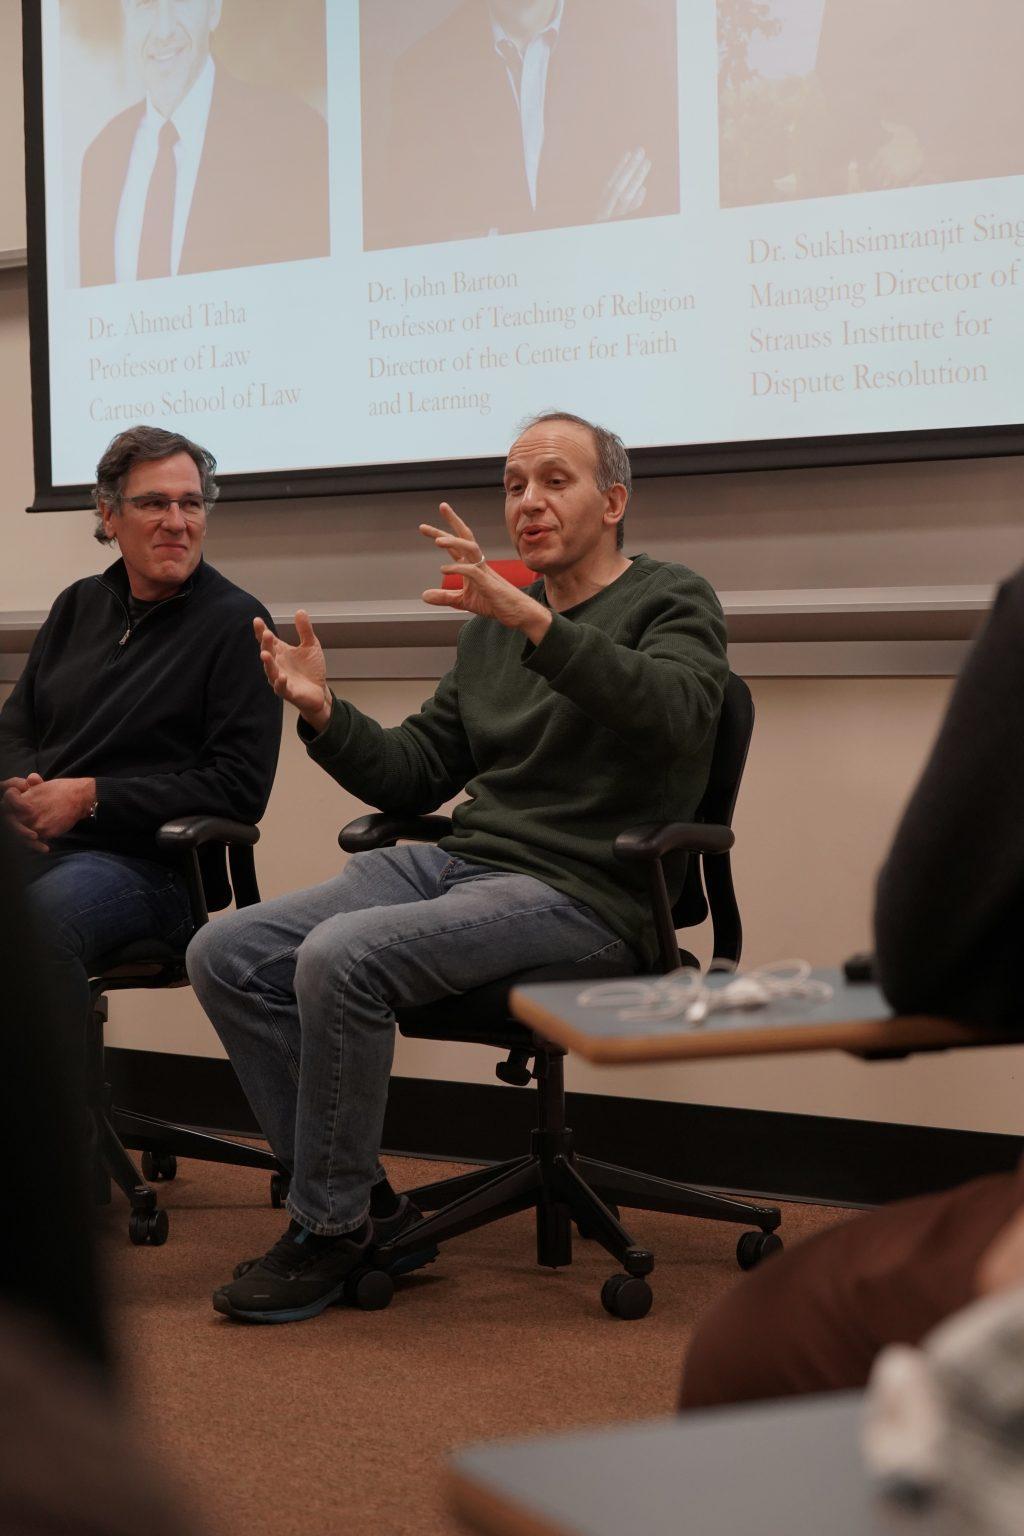 Professor Ahmed Taha shares his perspective on conversion at Beyond the Bubble on Feb. 15, in the Black Family Plaza Classrooms. Taha emphasized the importance of prioritizing relationships first.